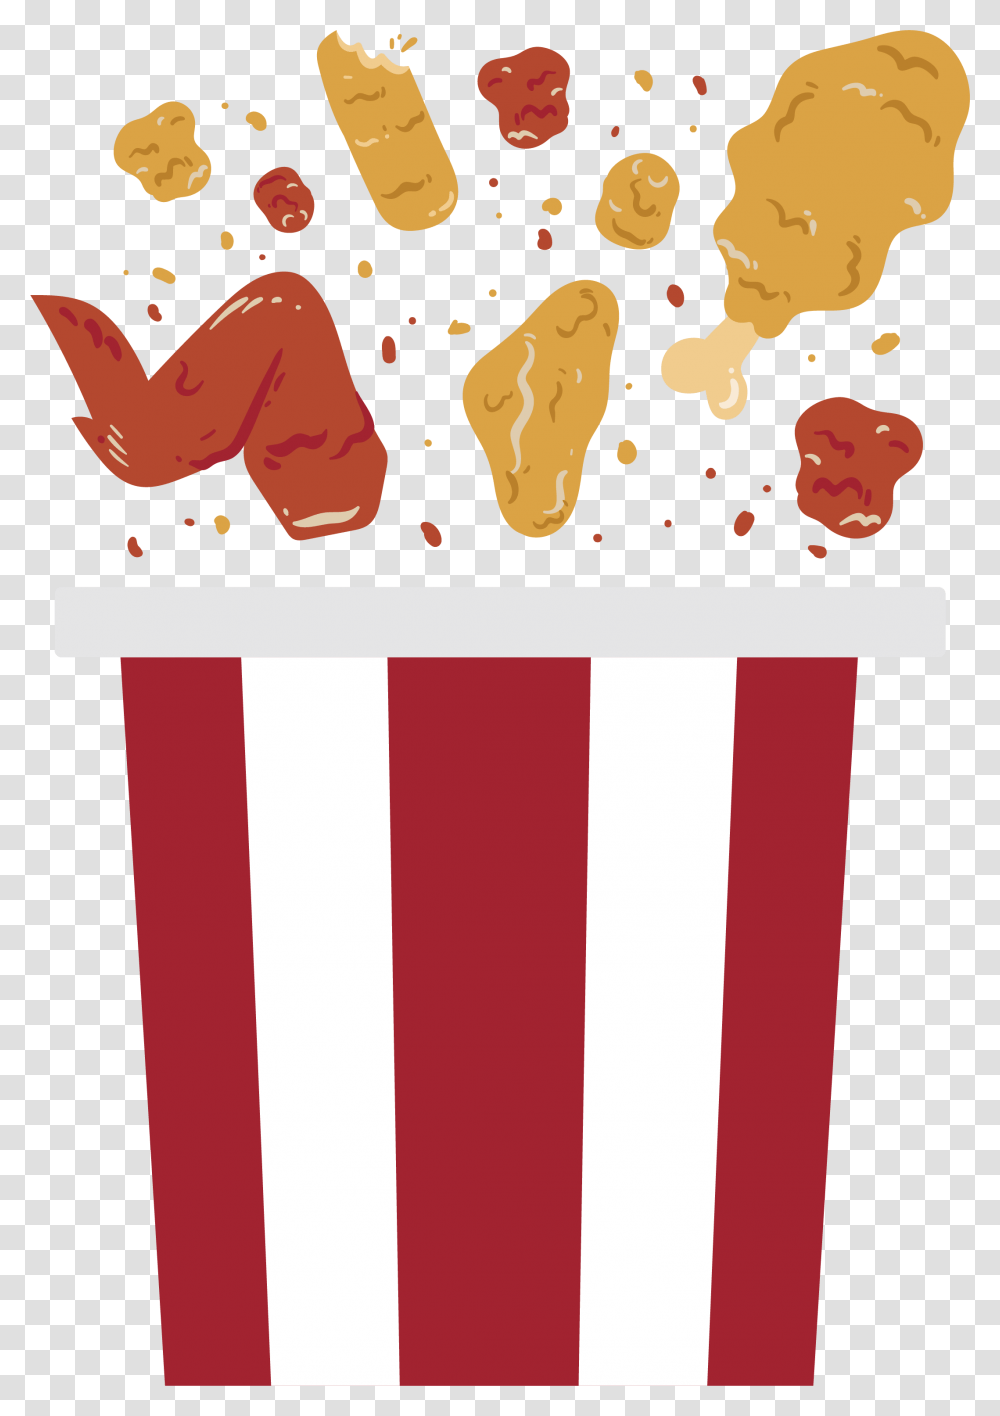 Crispy Fried Chicken Junk Food Frying, Sweets, Confectionery, Dessert, Ketchup Transparent Png